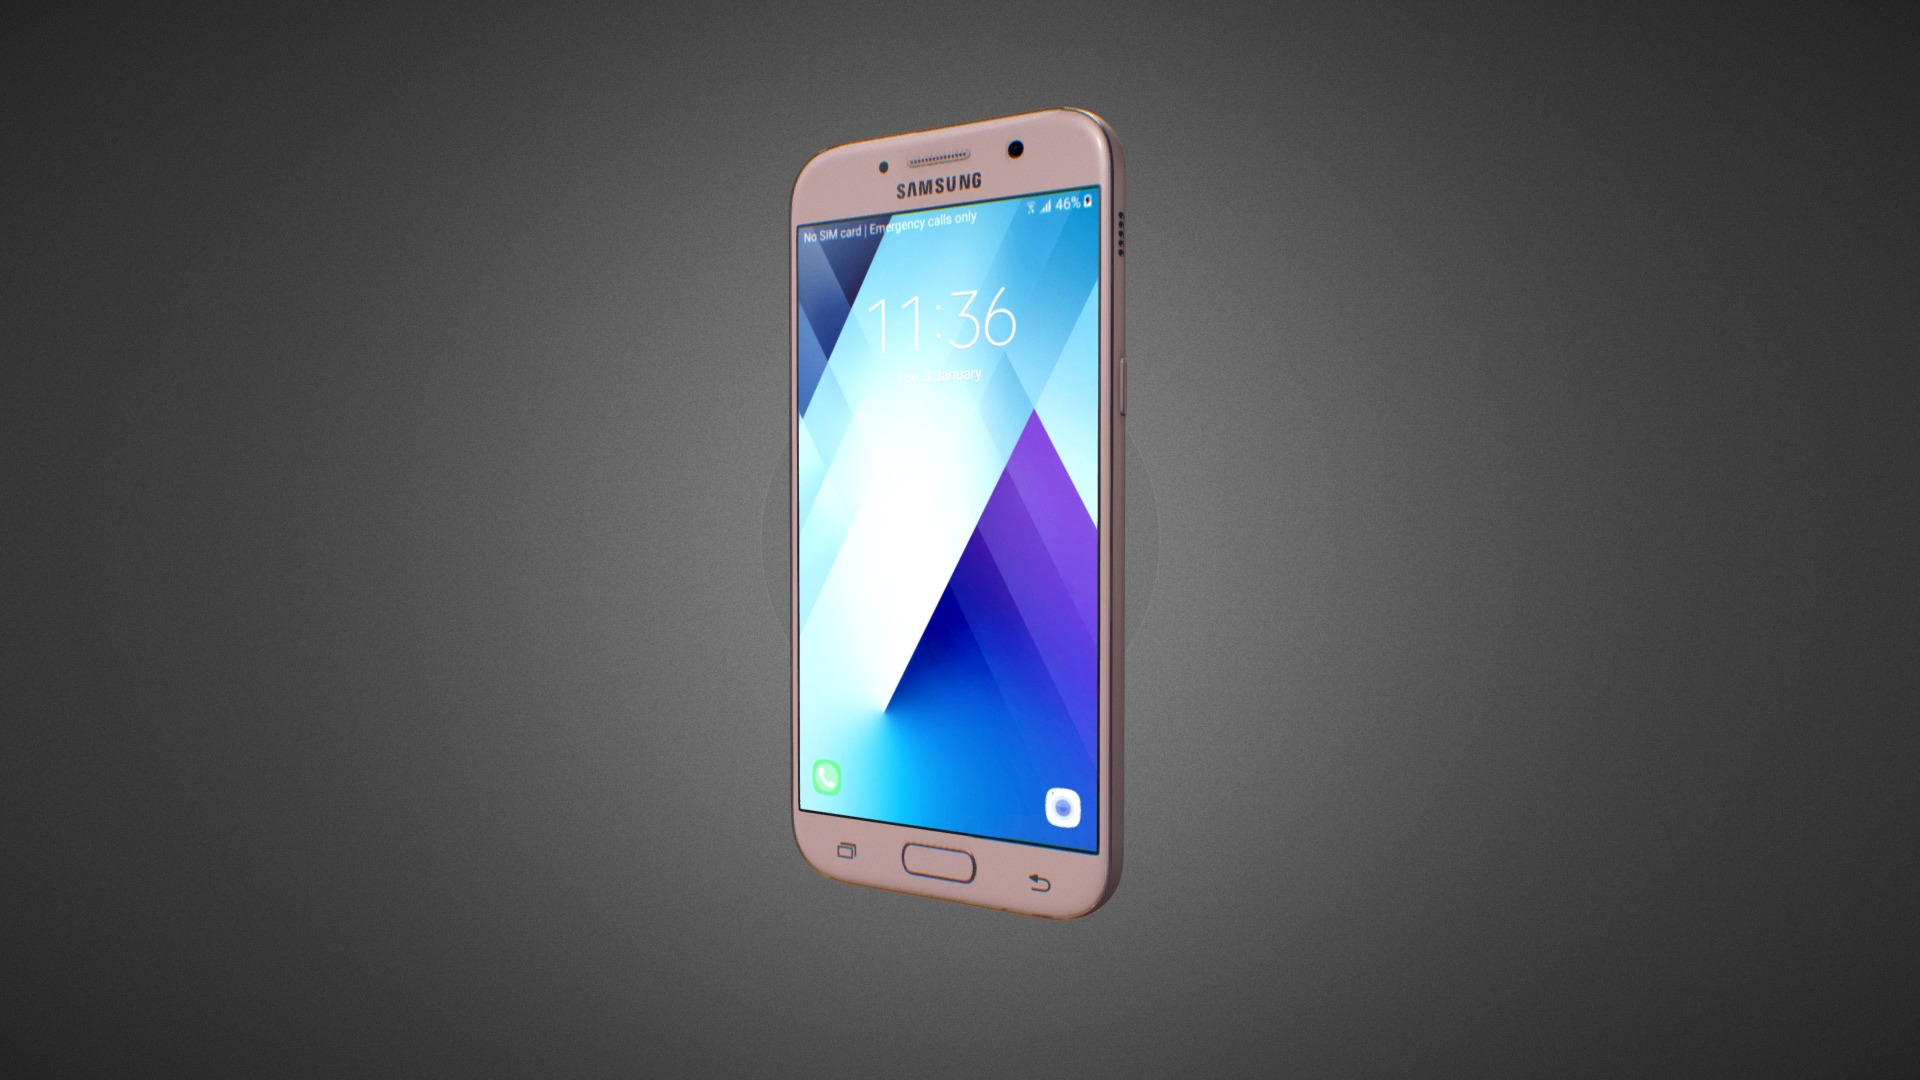 3D model Samsung Galaxy A5 2017 for Element 3D - This is a 3D model of the Samsung Galaxy A5 2017 for Element 3D. The 3D model is about a cell phone with a blue screen.